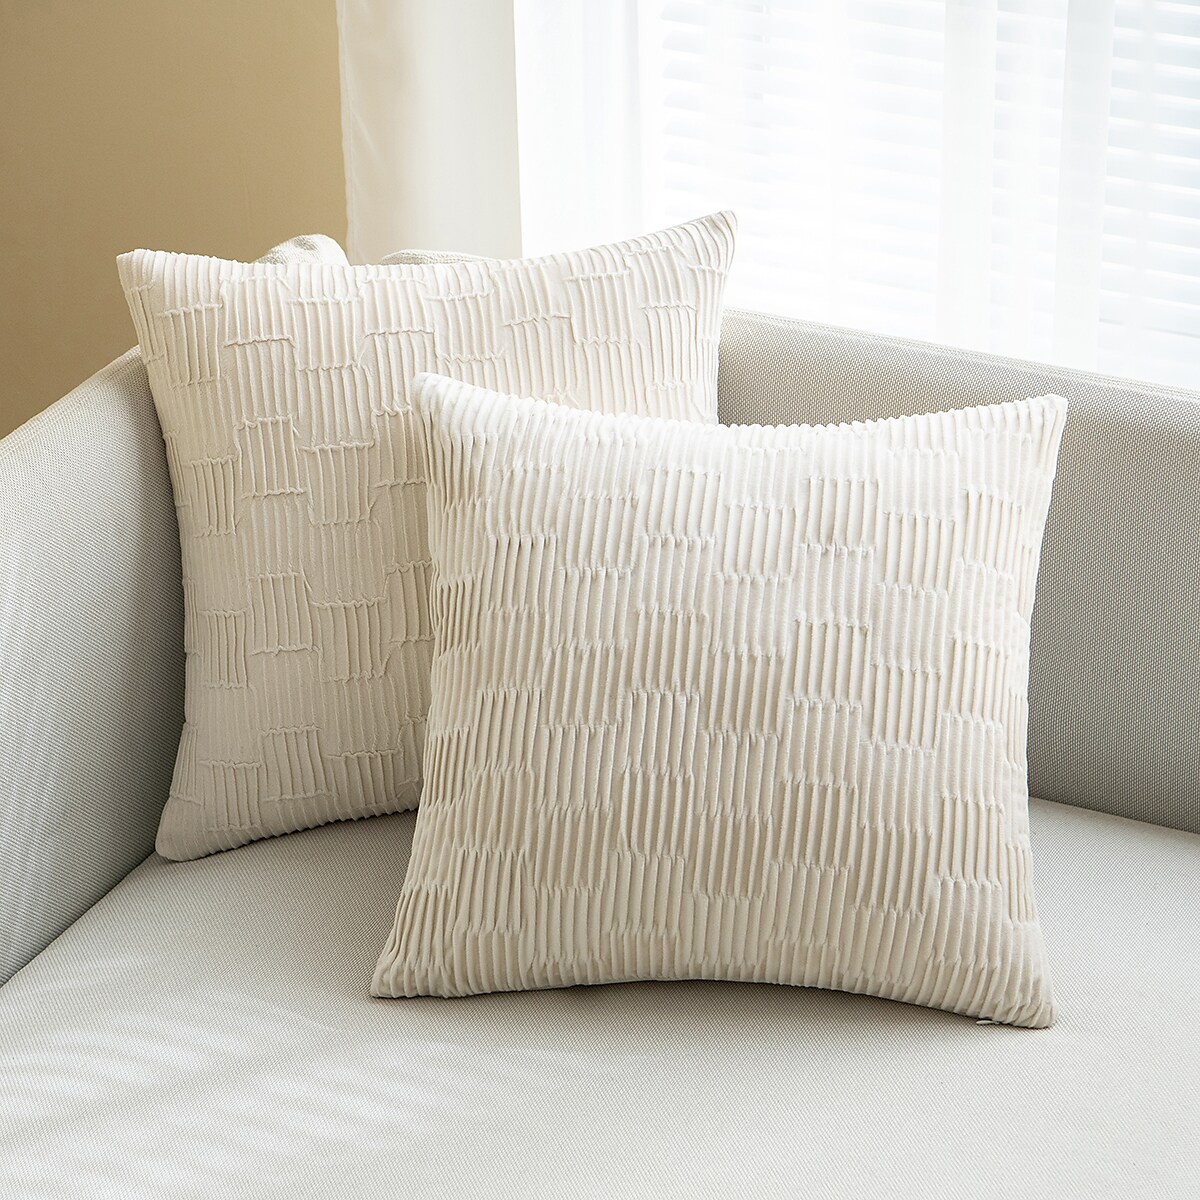 1 pcs Polyester Pillow Cover 